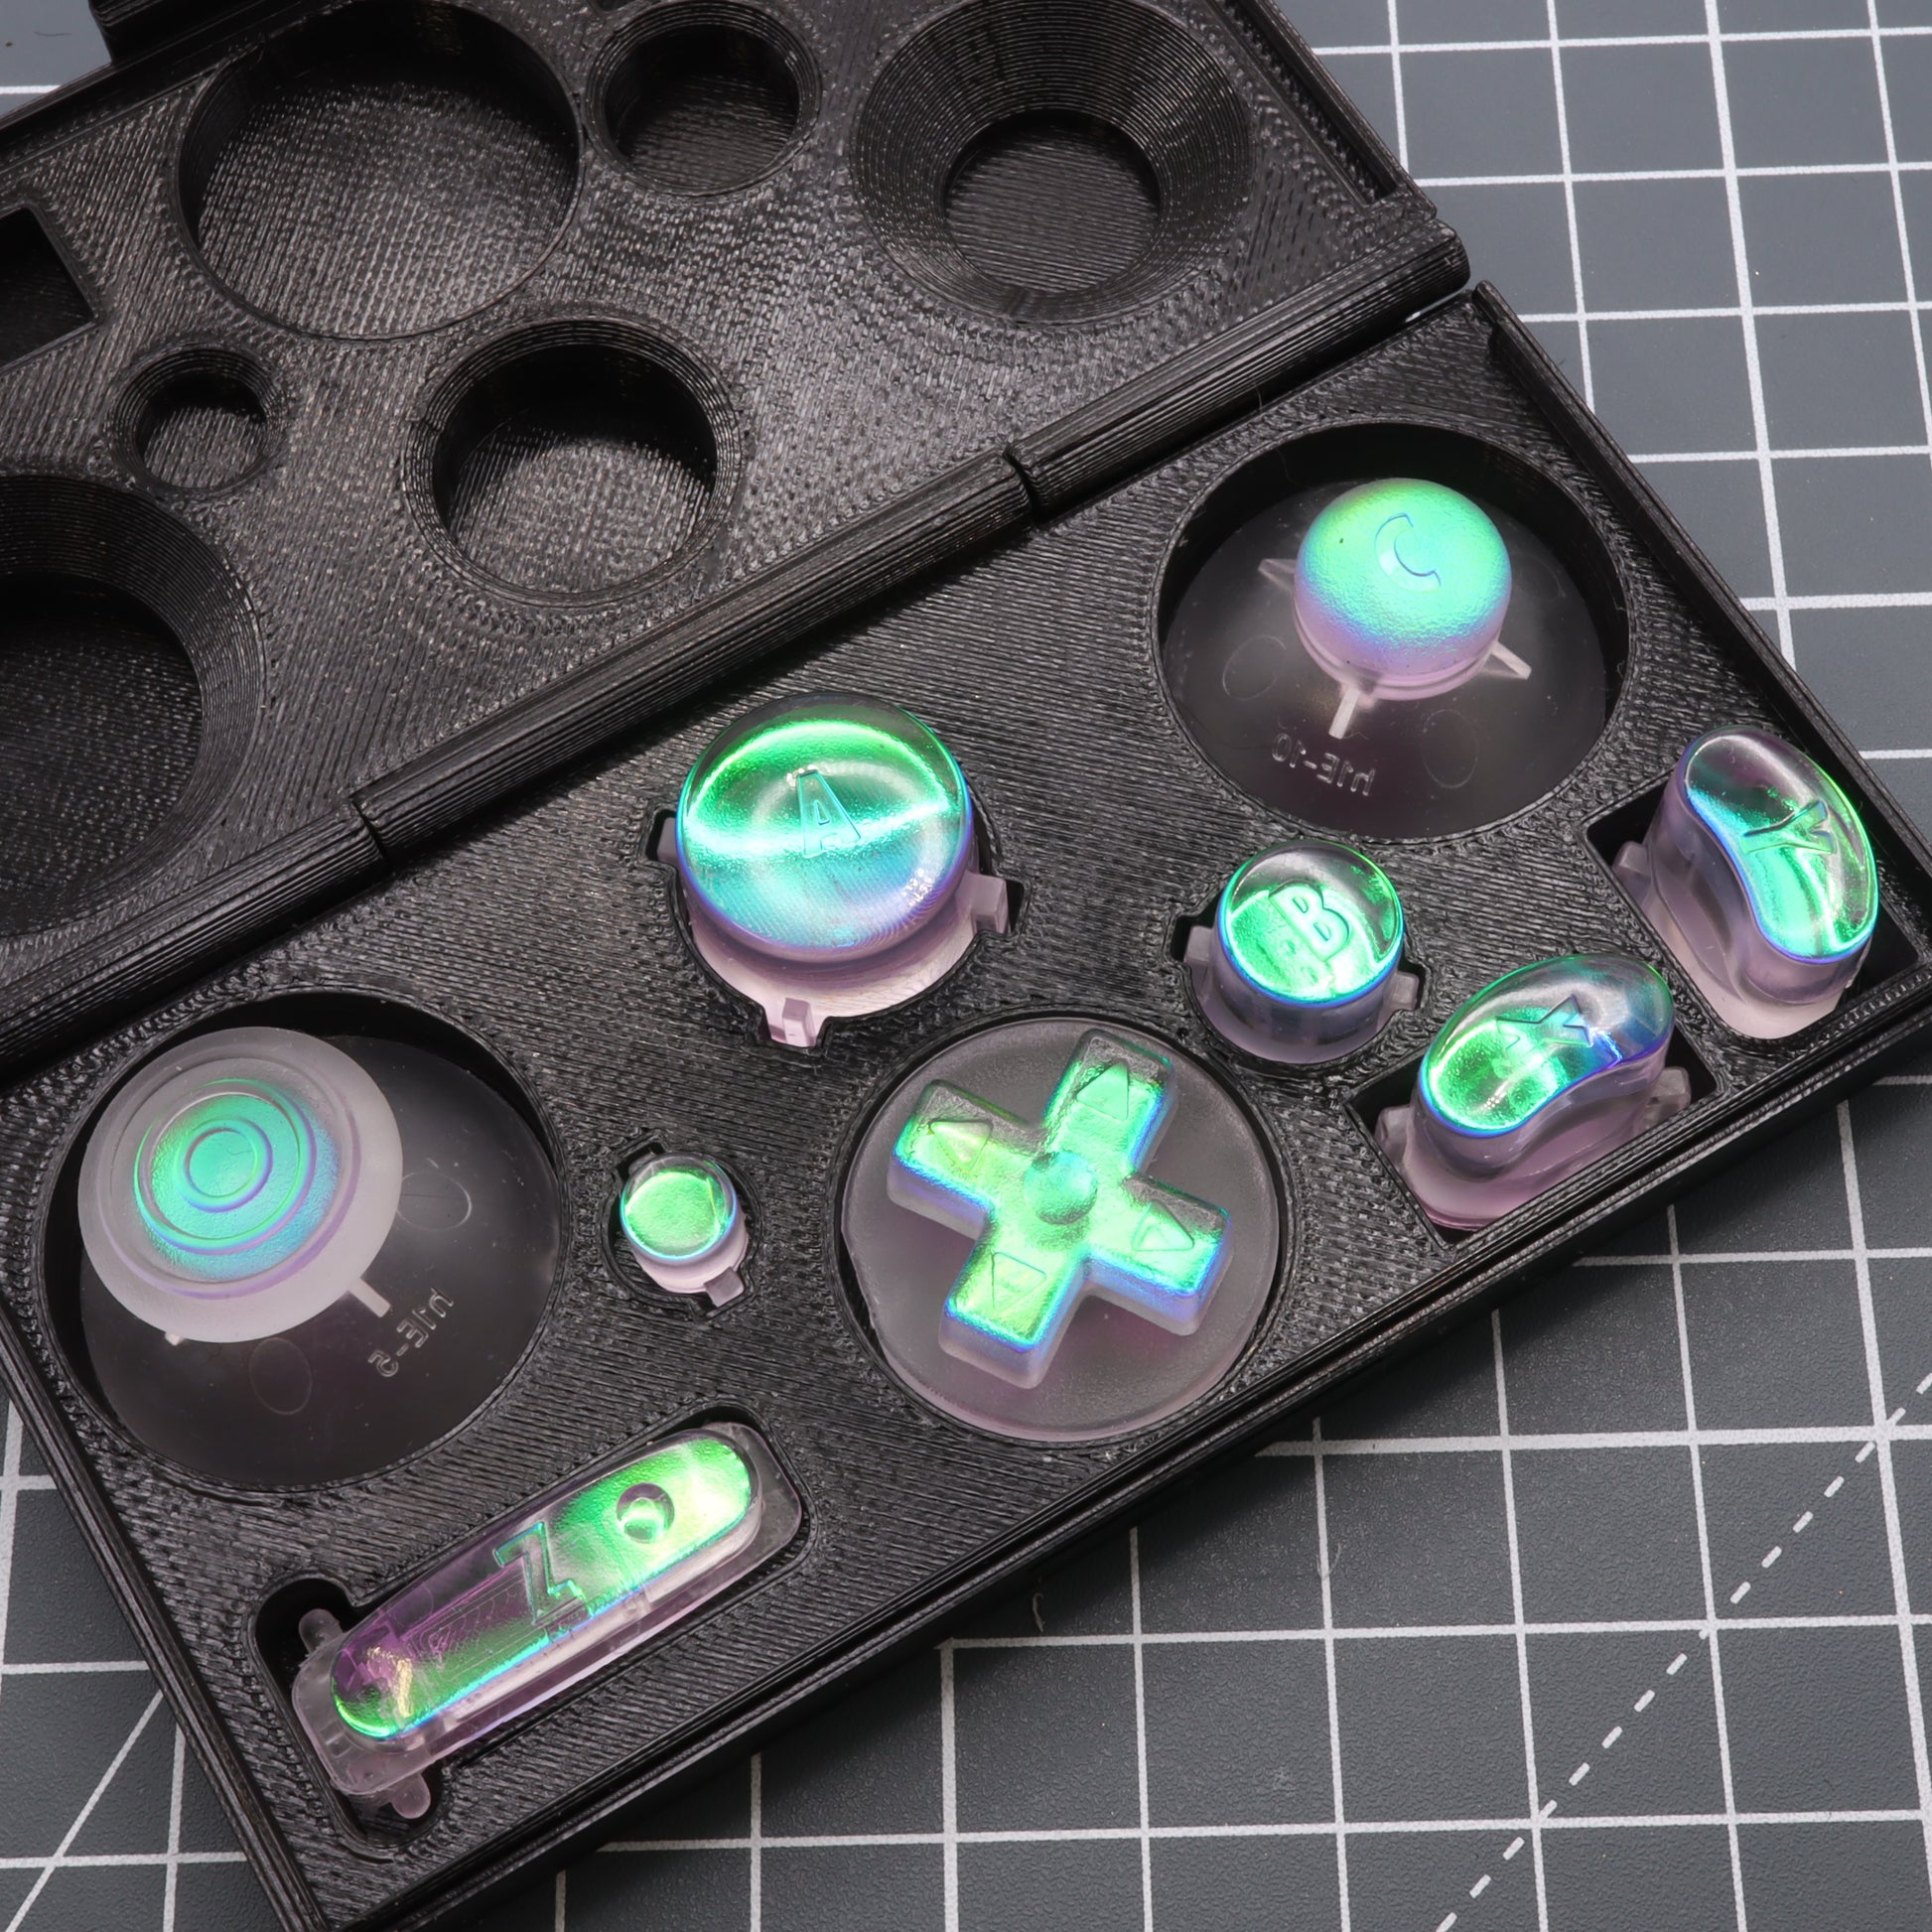 Custom translucent Cool Opal and purple gaming controller buttons with a Dichroic effect displayed in a black case.